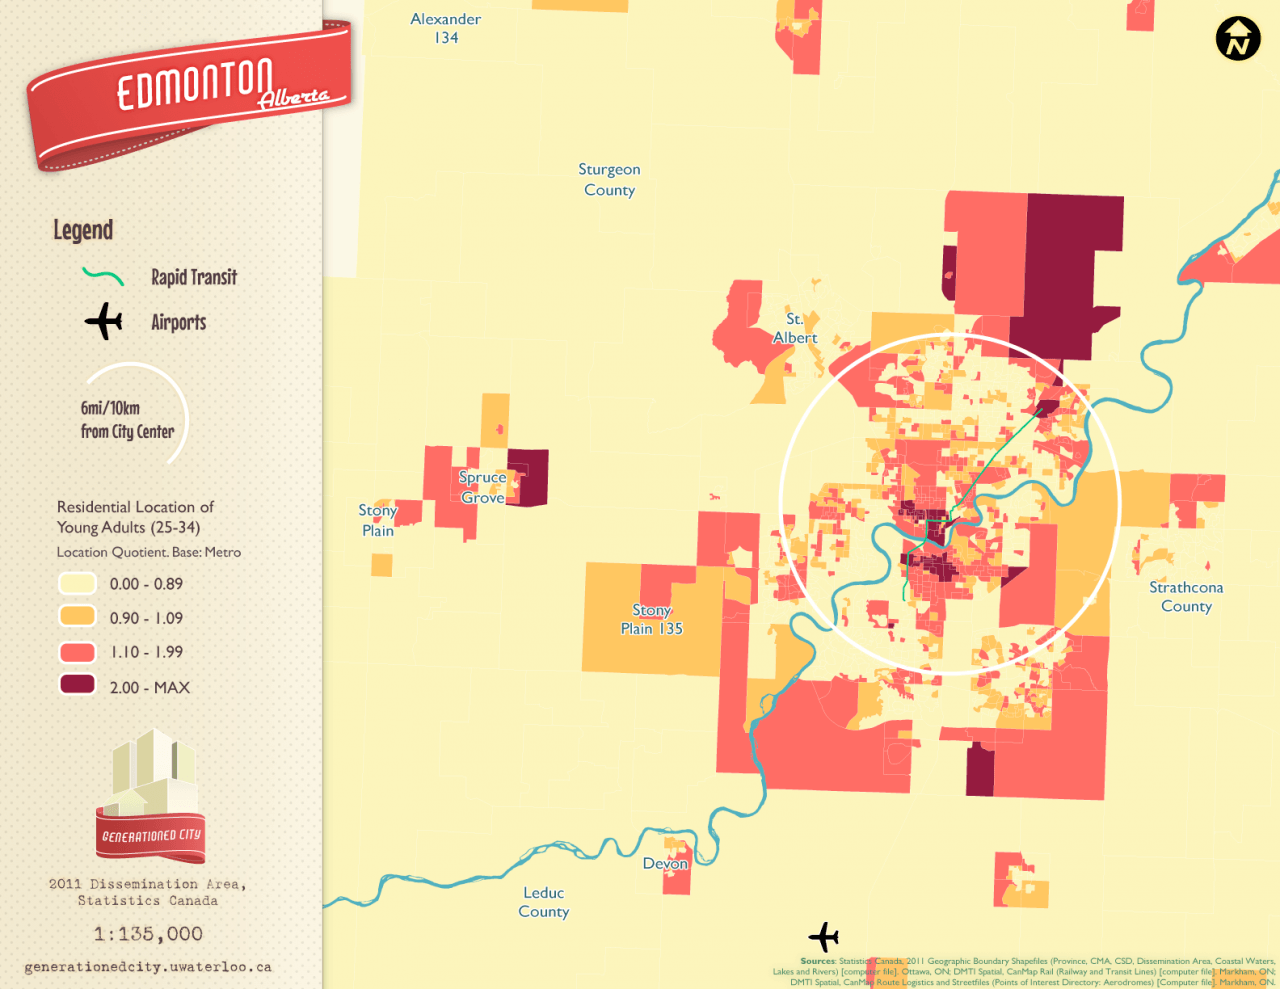 Residential location of young adults in Edmonton.